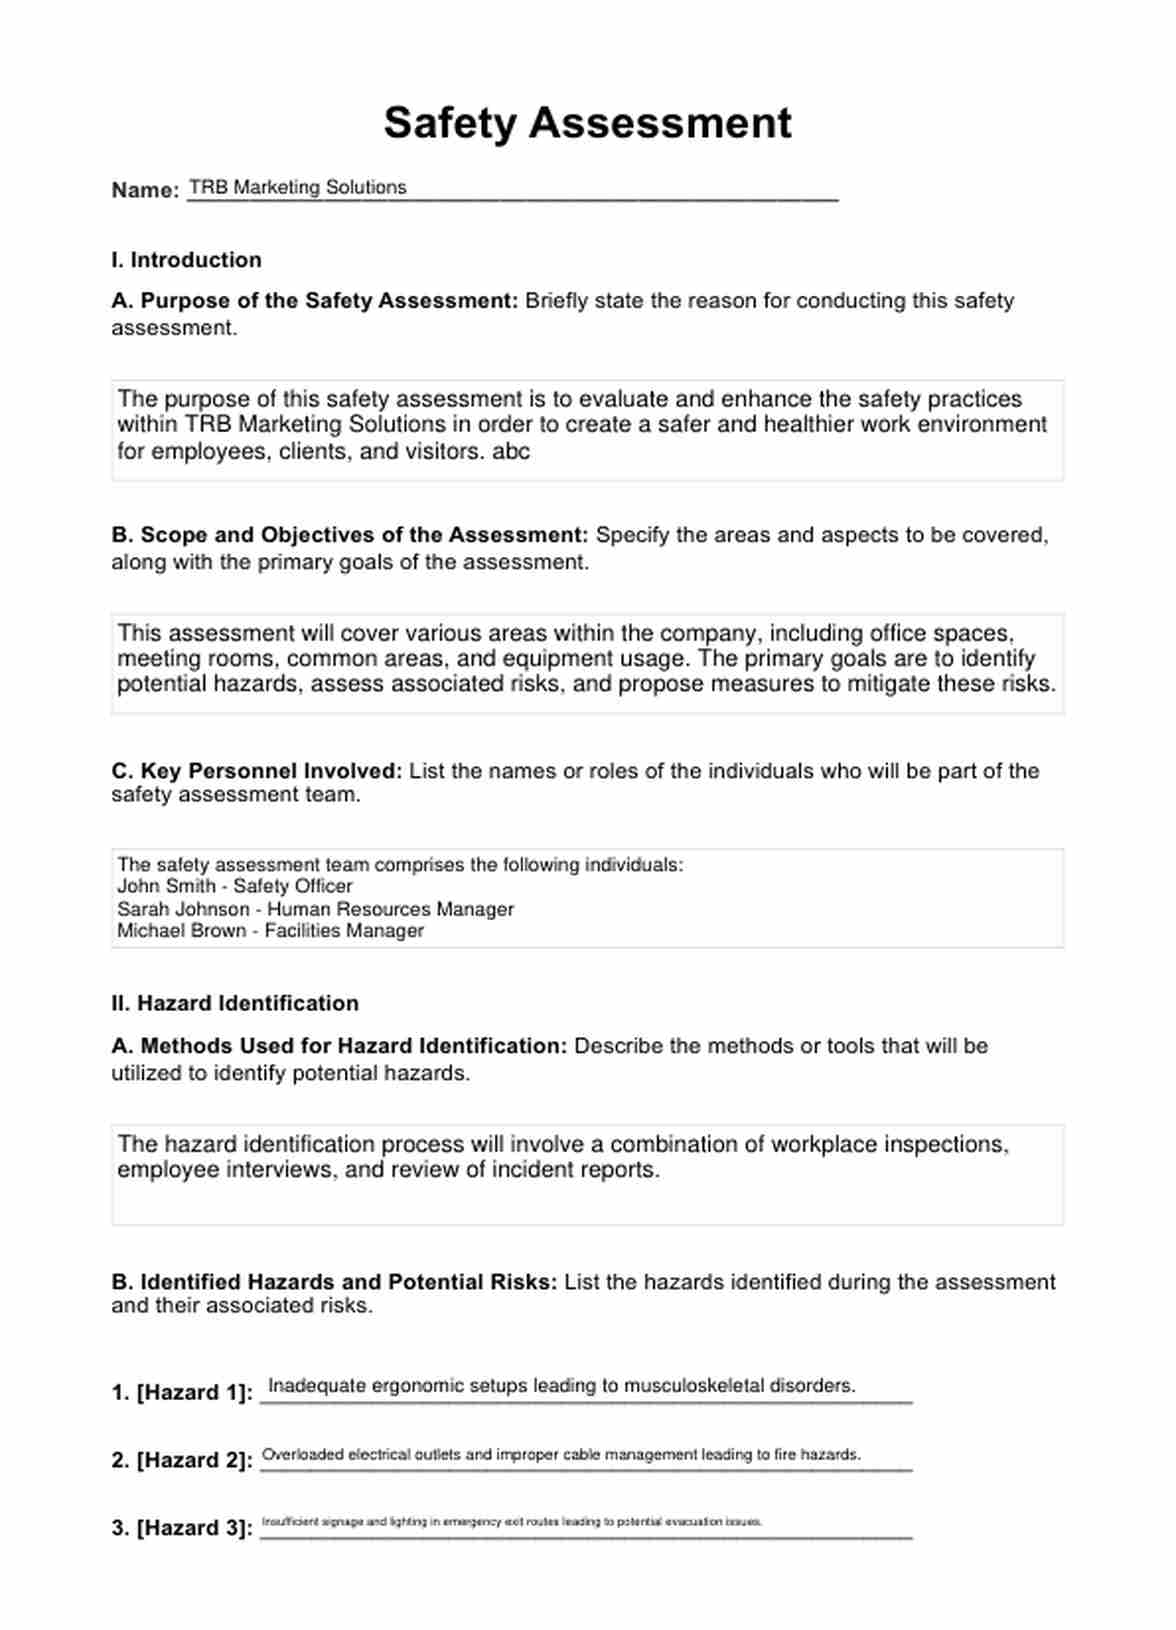 Safety Assessment PDF Example